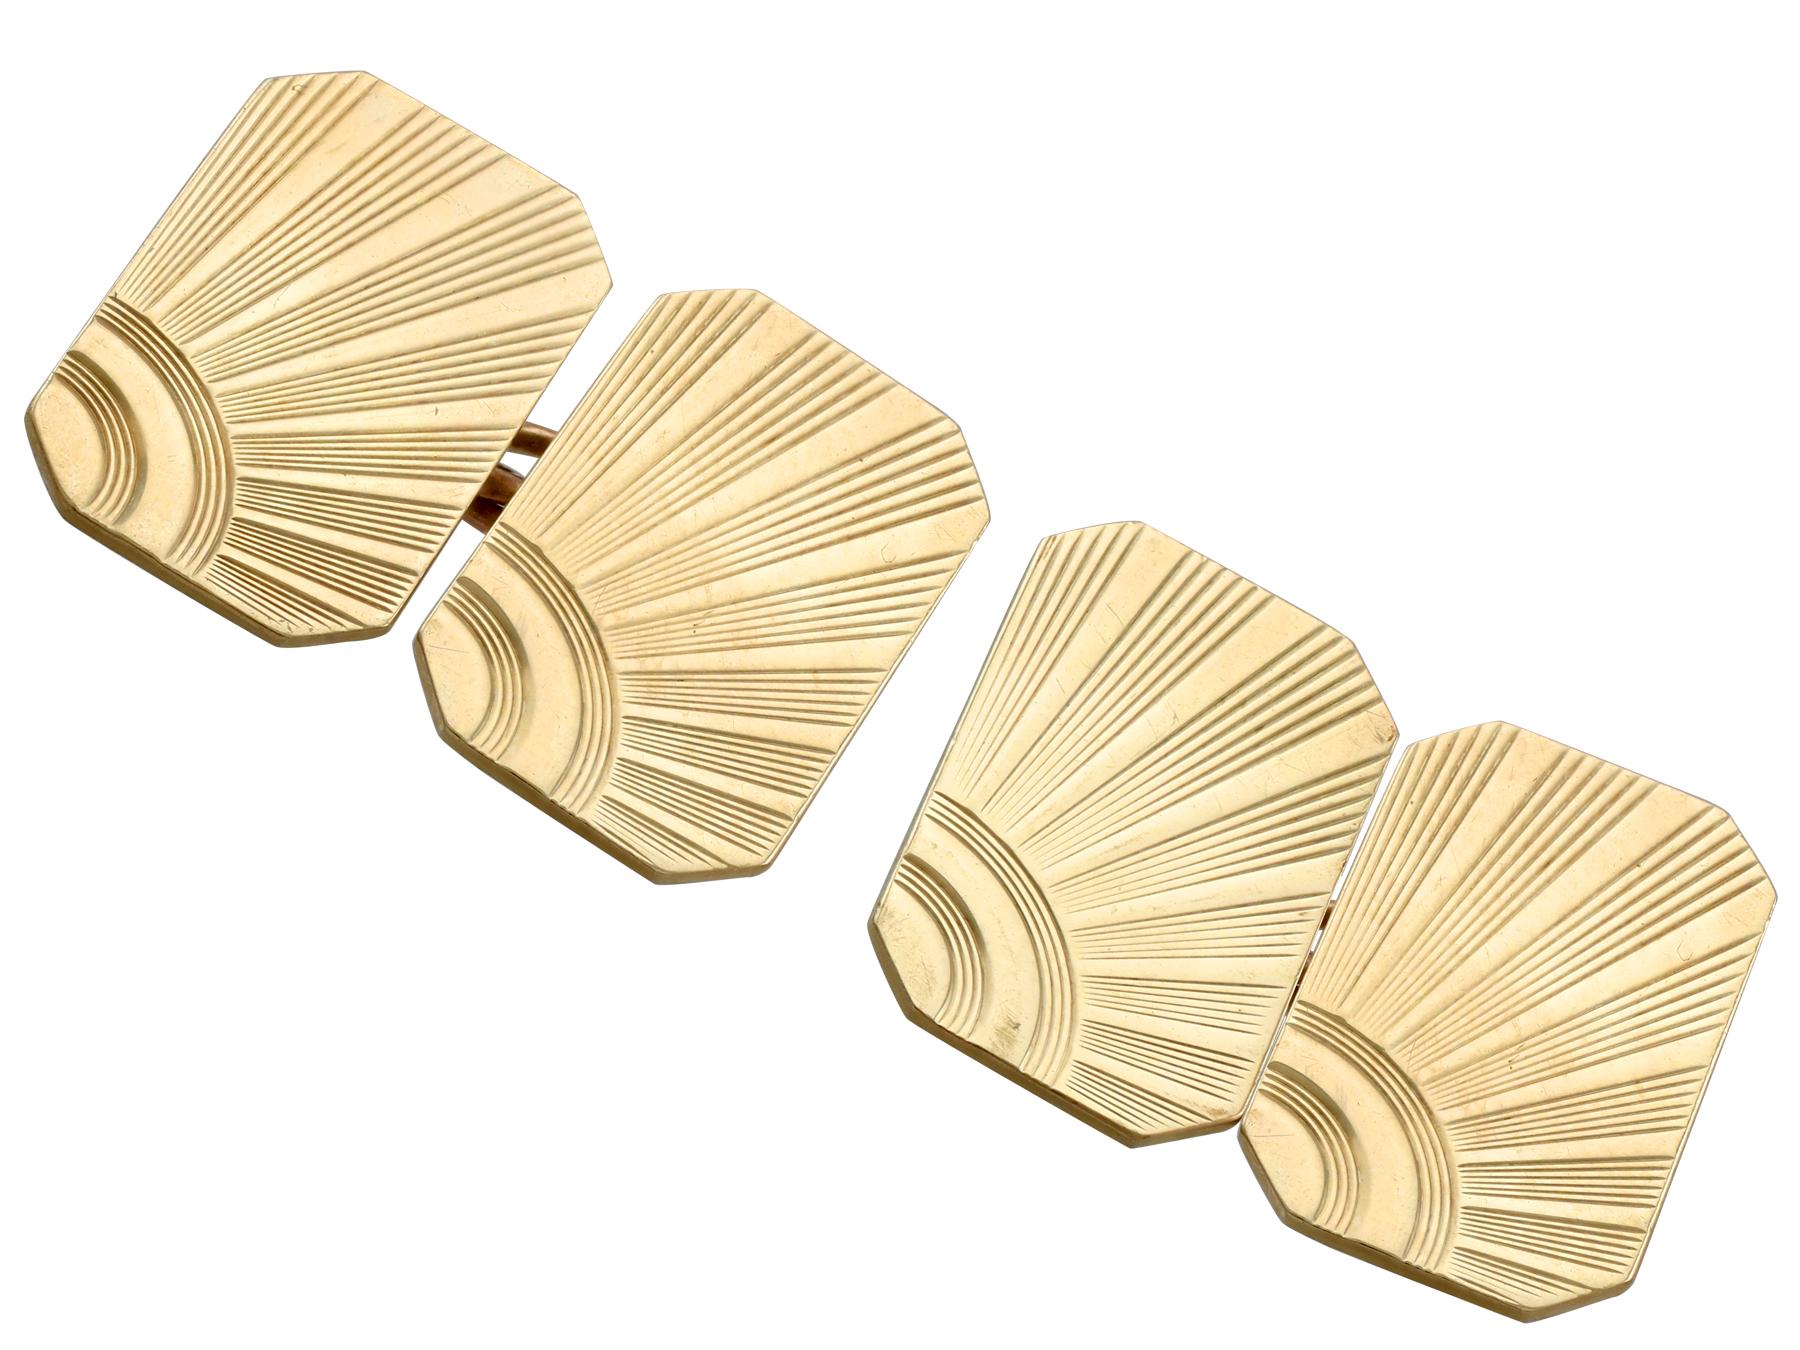 A pair of fine vintage Art Deco style cufflinks in 9 karat yellow gold; part of our gents jewelry/jewelry collection

These fine vintage cufflinks have been crafted in 9k yellow gold in the iconic Art Deco style.

The cufflinks have a rectangular